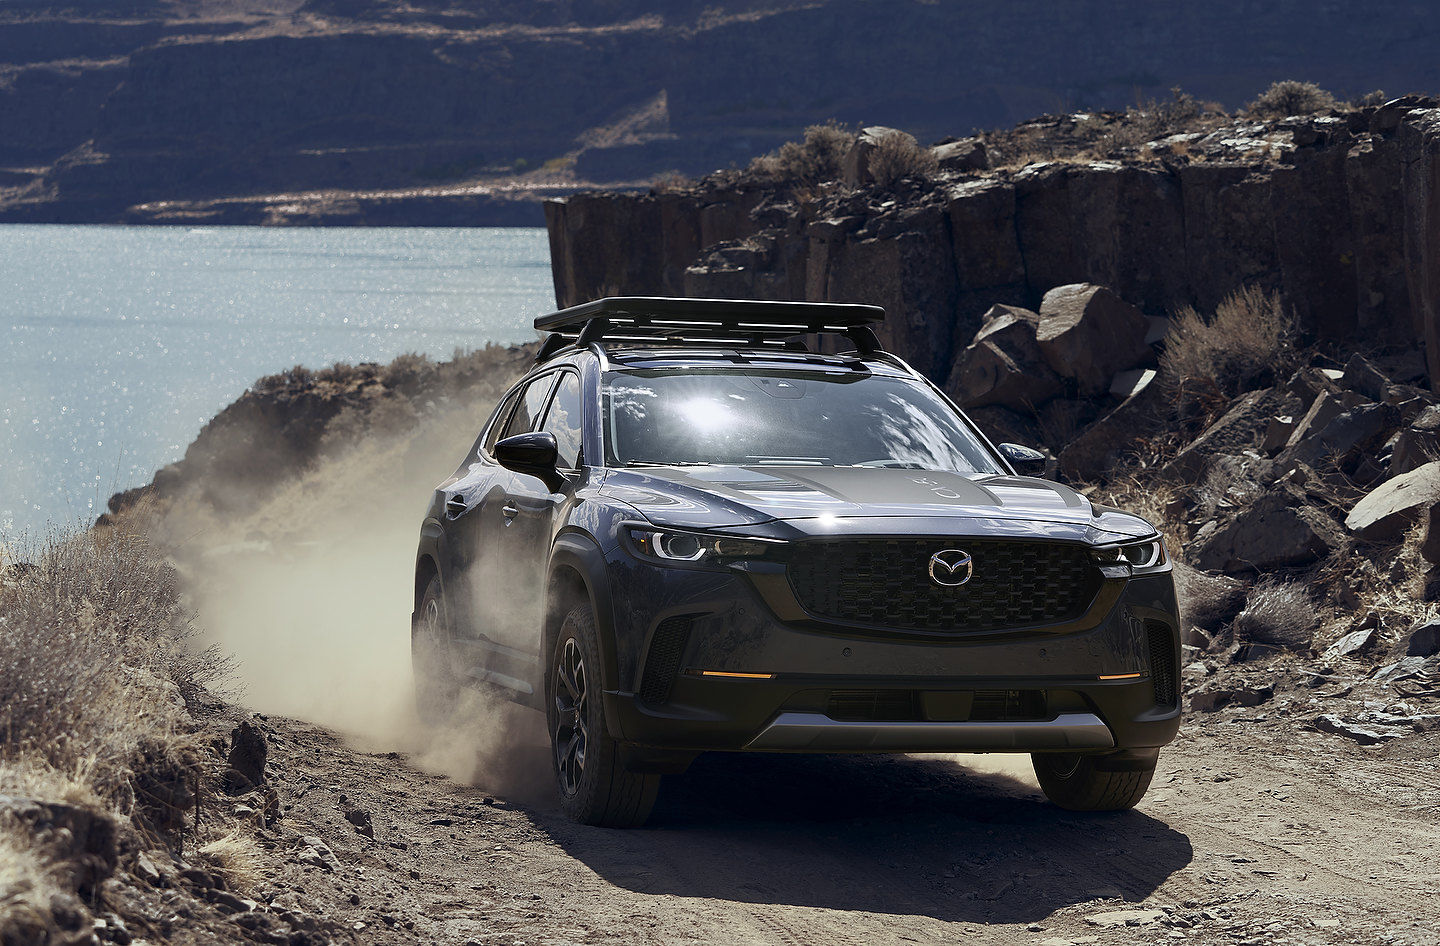 This is the brand-new 2023 Mazda CX-50 and it is coming next year